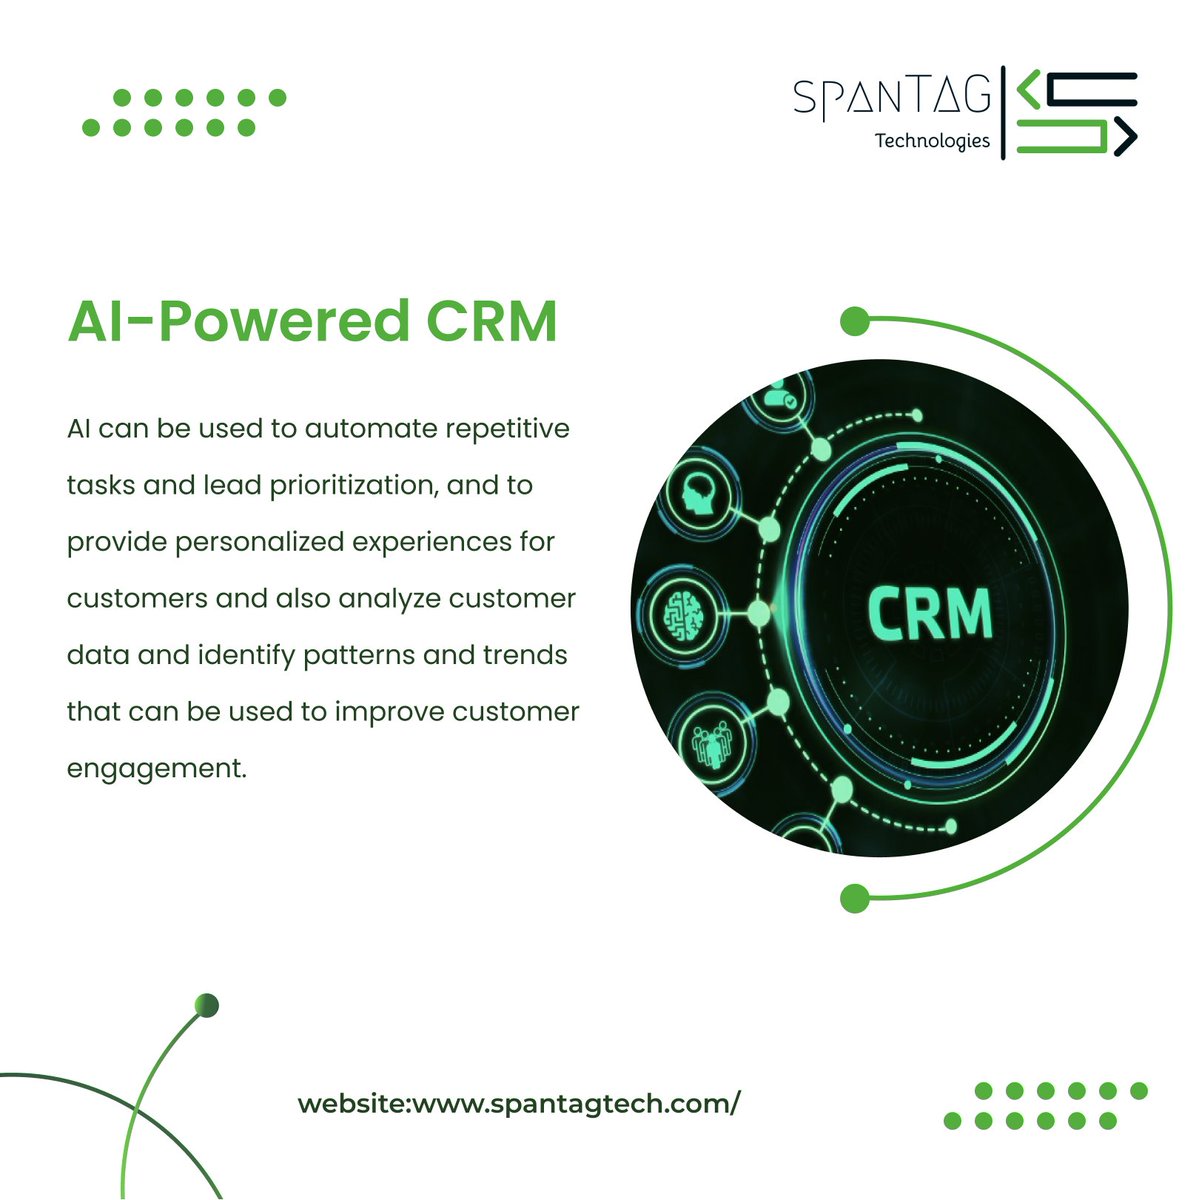 Our AI-powered CRM solutions optimize sales and marketing strategies, enhance customer engagement, and increase profitability.

#spanTAGtech #AI #ML #CRM #SalesOptimization #CustomerEngagement #Profitability #BusinessSolutions #RealTimeInsights #Automation #Innovation